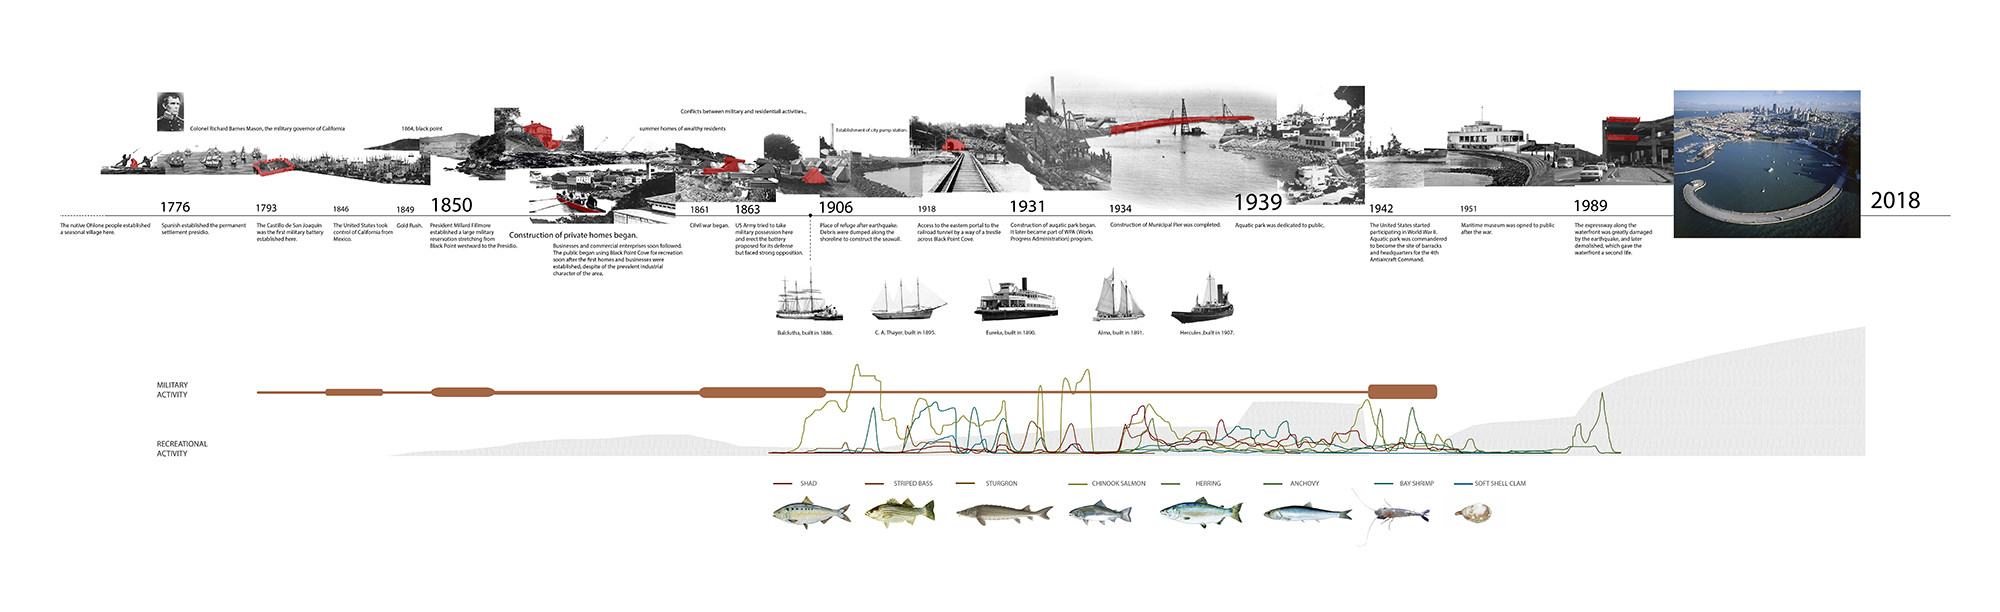 timeline of San Francisco waterfront history